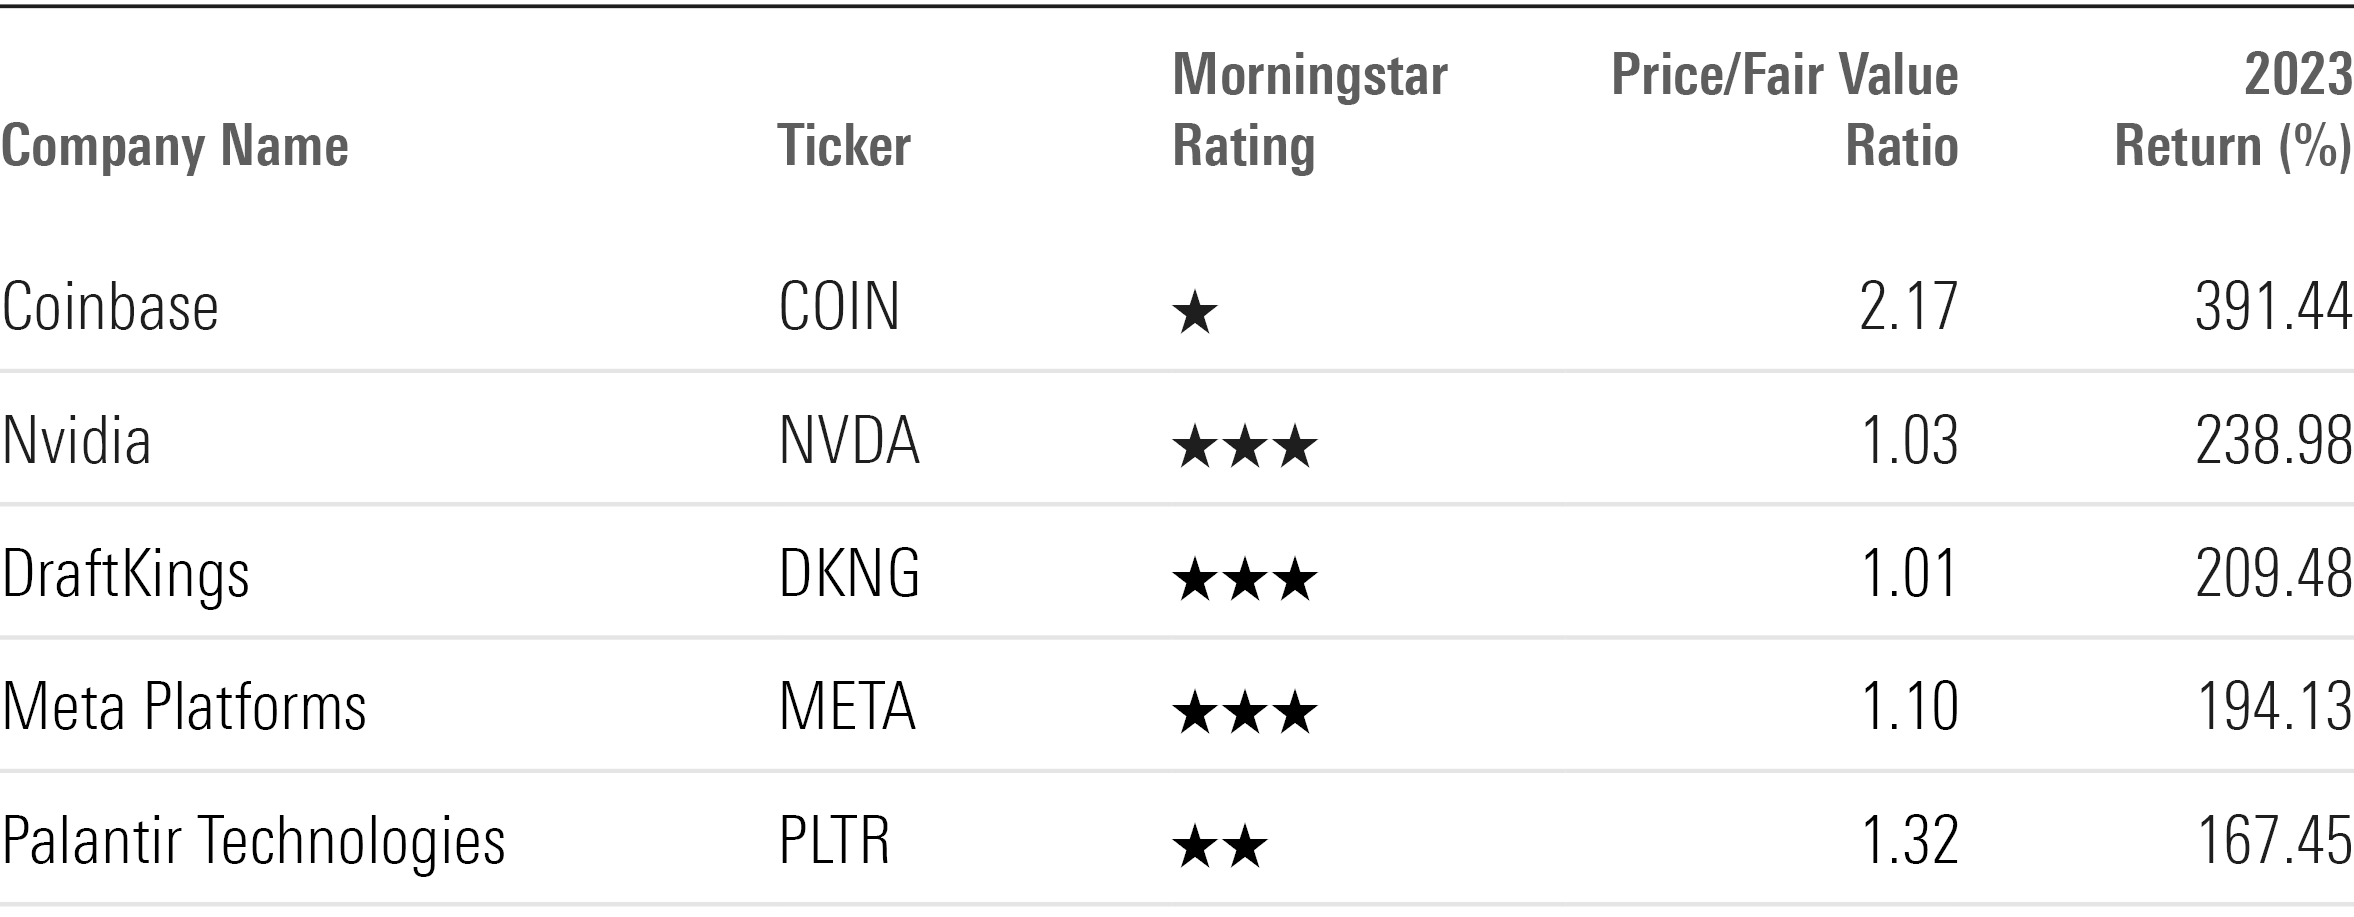 Table showing ticker, Morningstar Rating, price/fair value ratio, and return for the top-performing stocks of 2023.